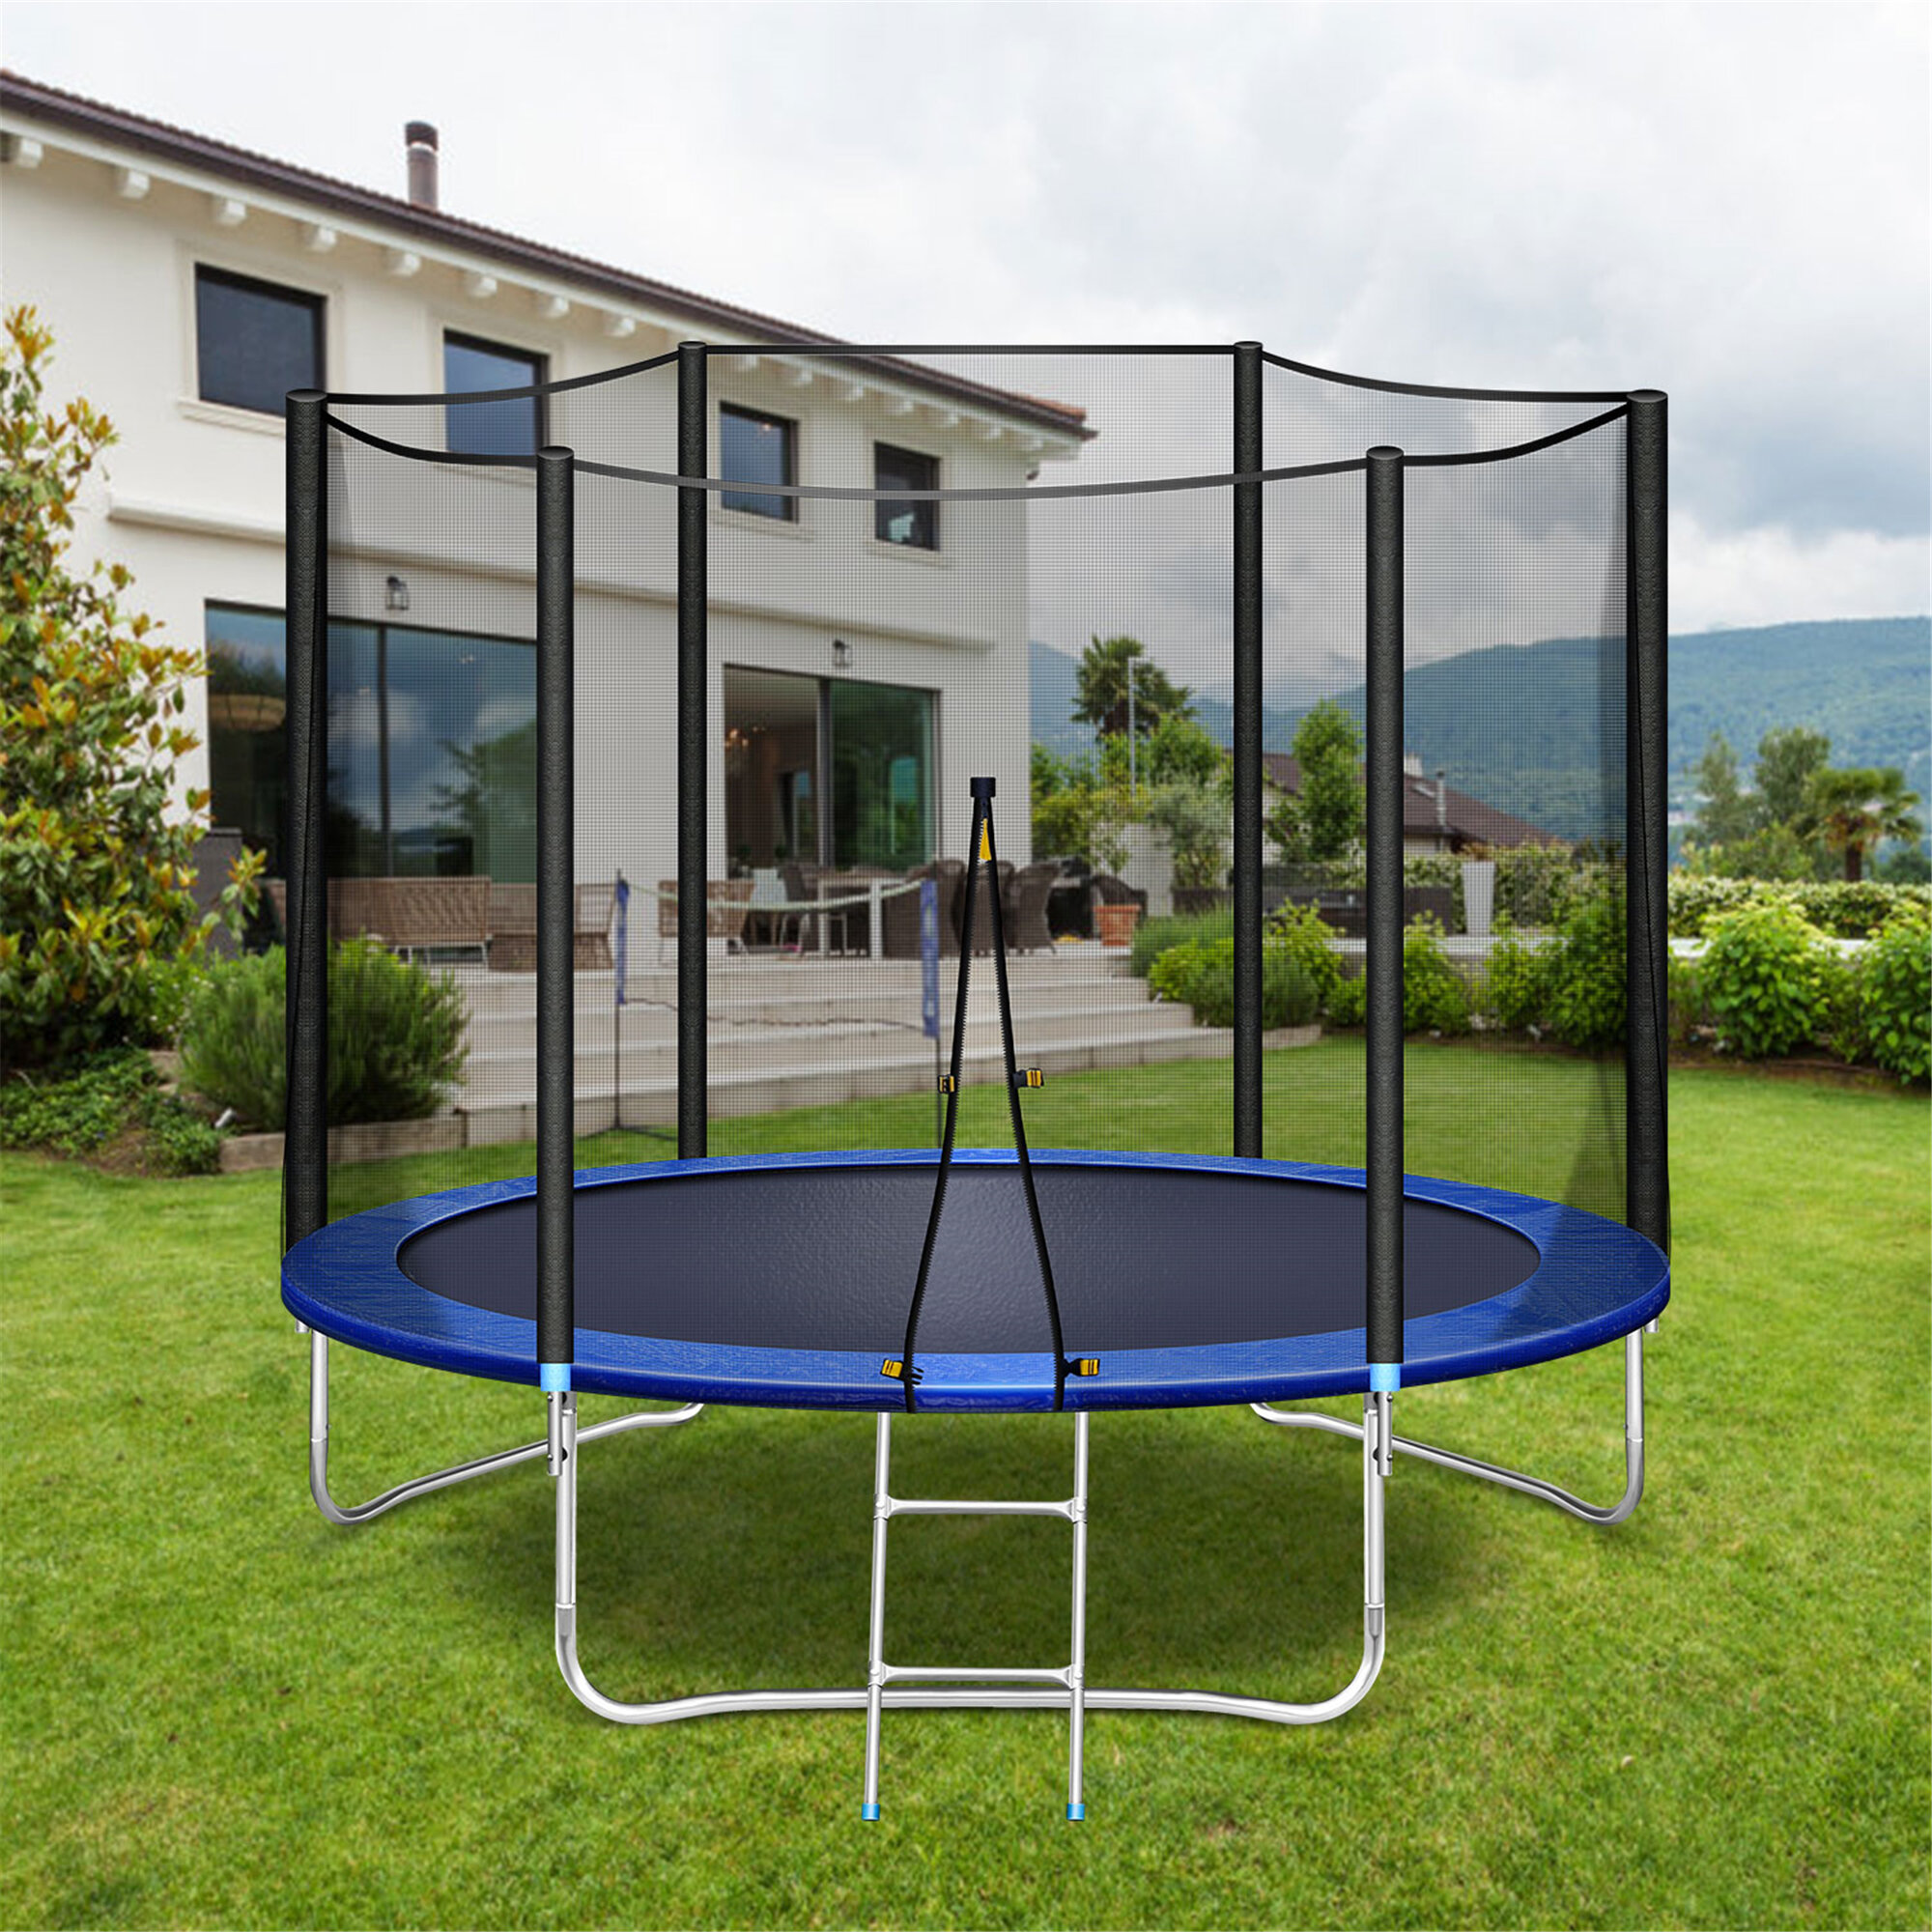 Trampoline for Kids and Adult,14 FT Outdoor Trampoline Jump Recreational Trampolines with Safety Enclosure Net Spring Pad,Waterproof Jump Mat & Ladder Trampoline 